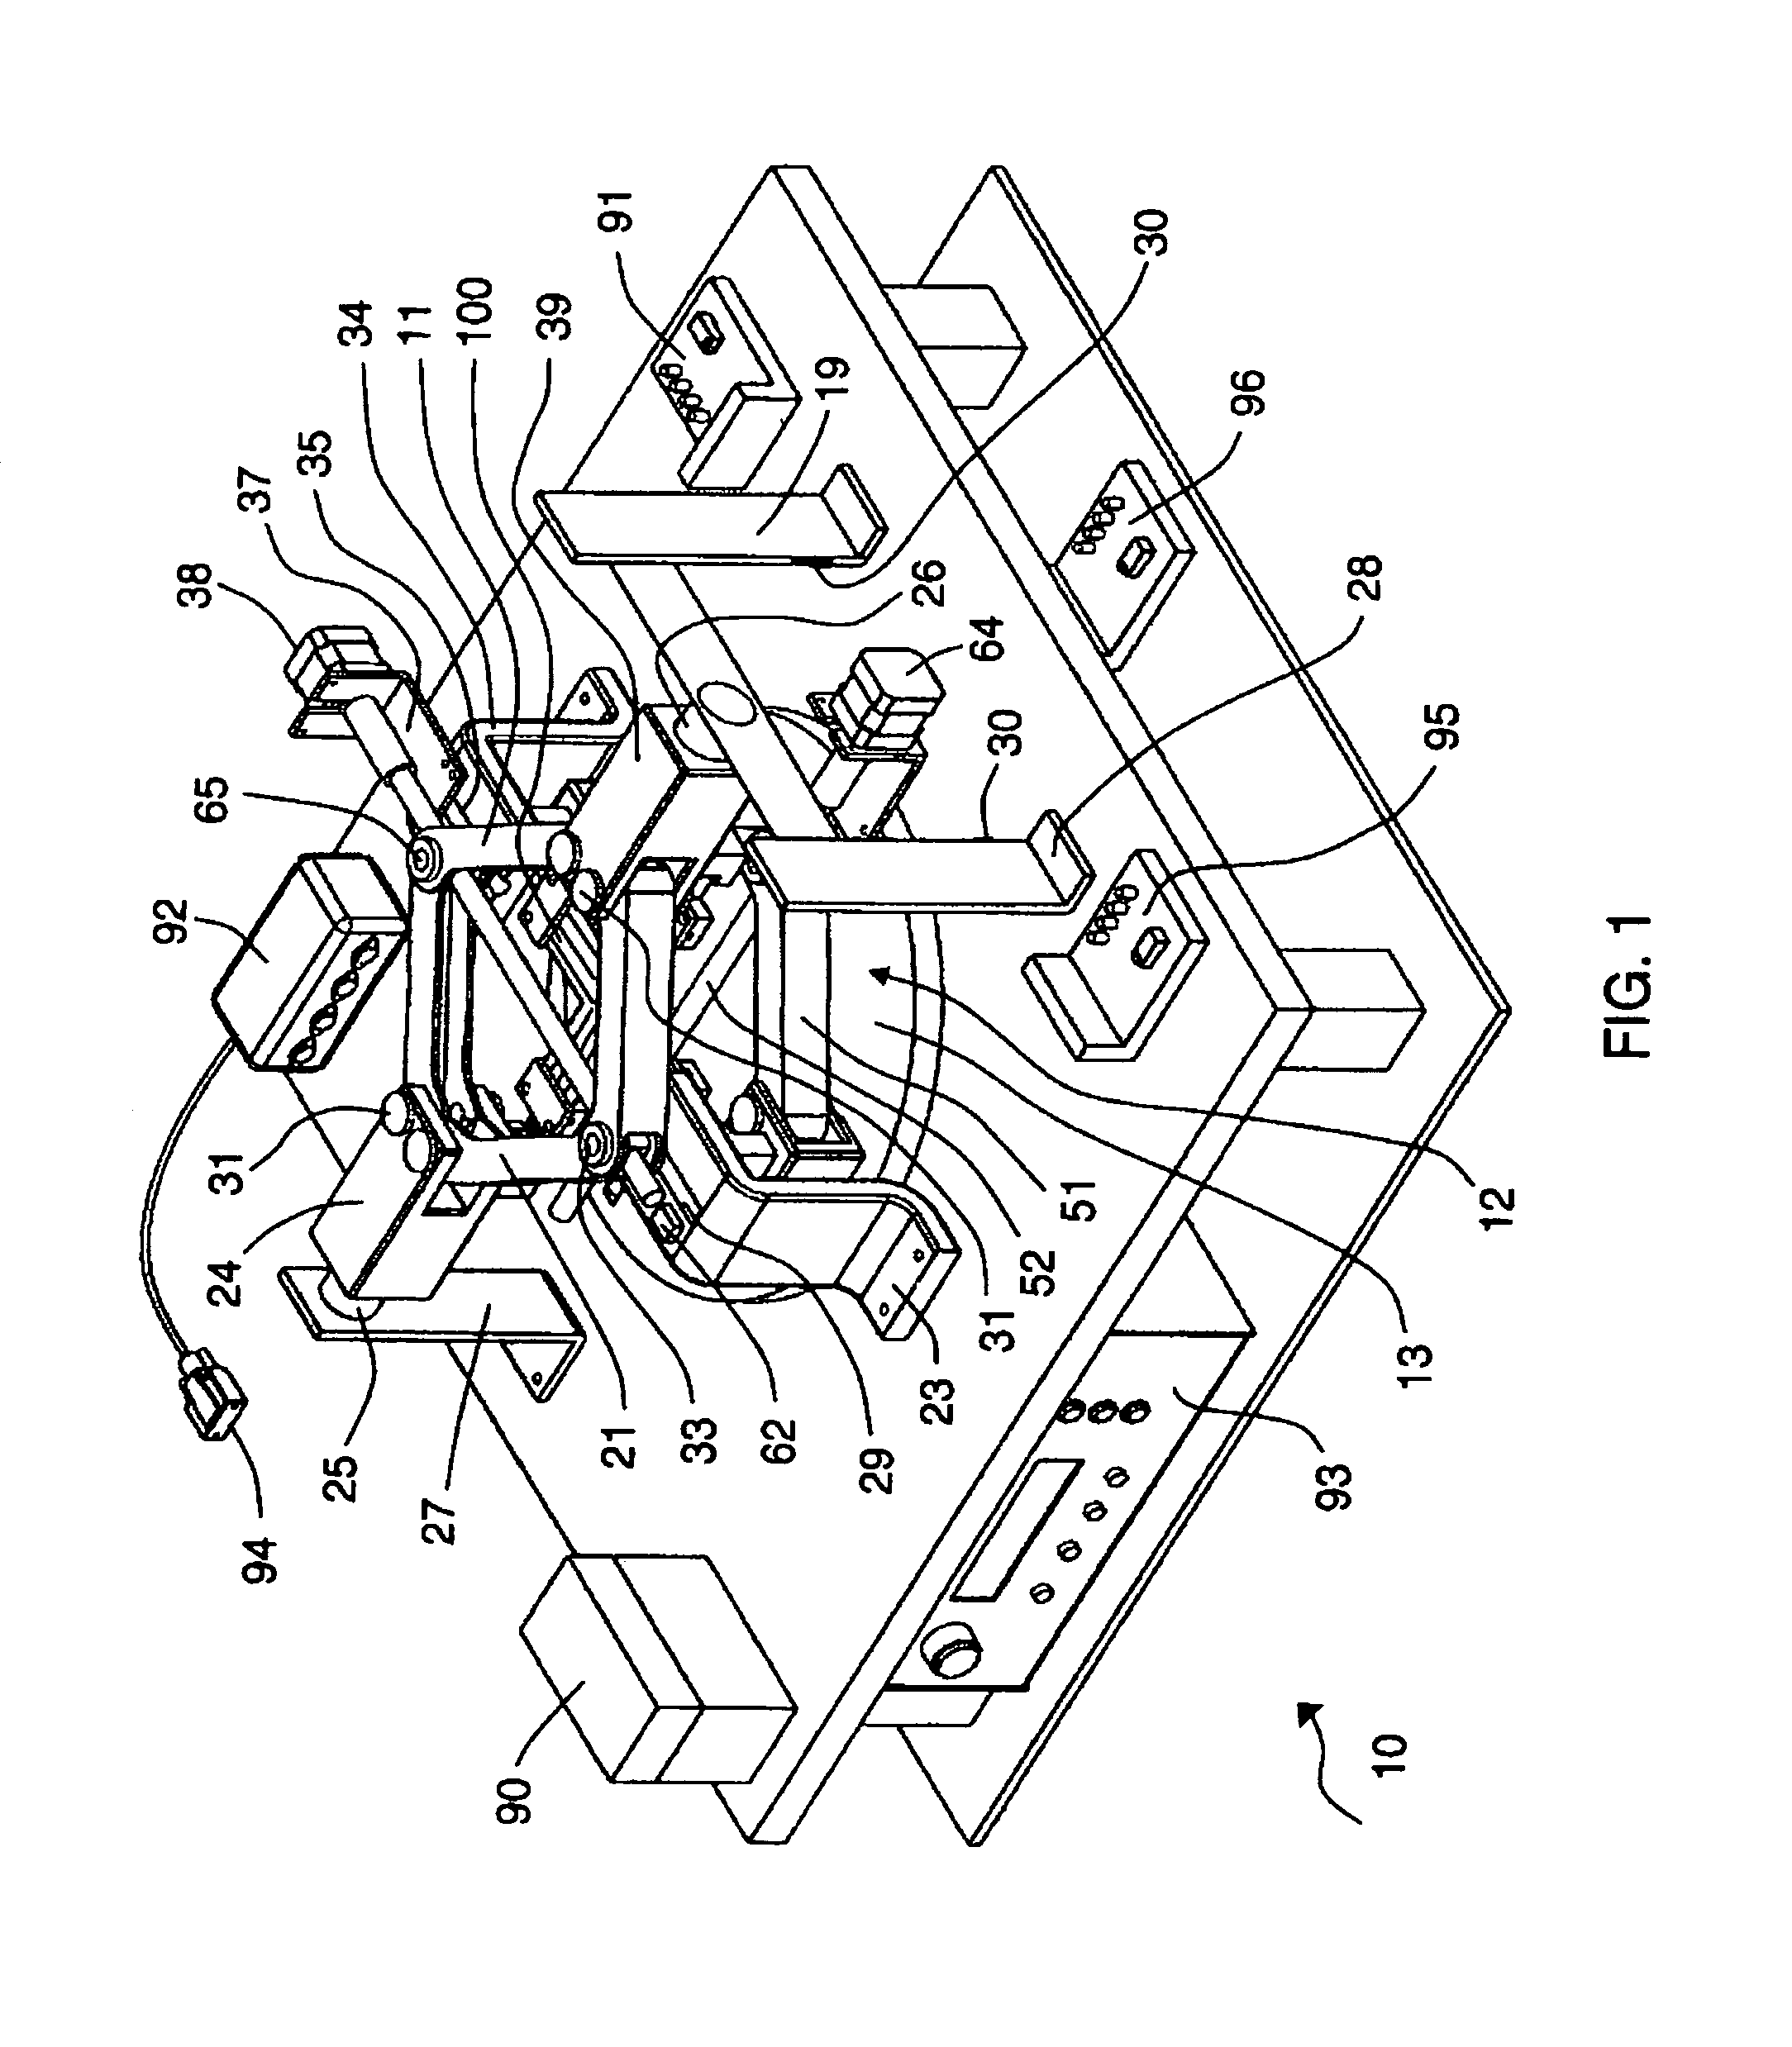 Compact and stand-alone combined multi-axial and shear test apparatus